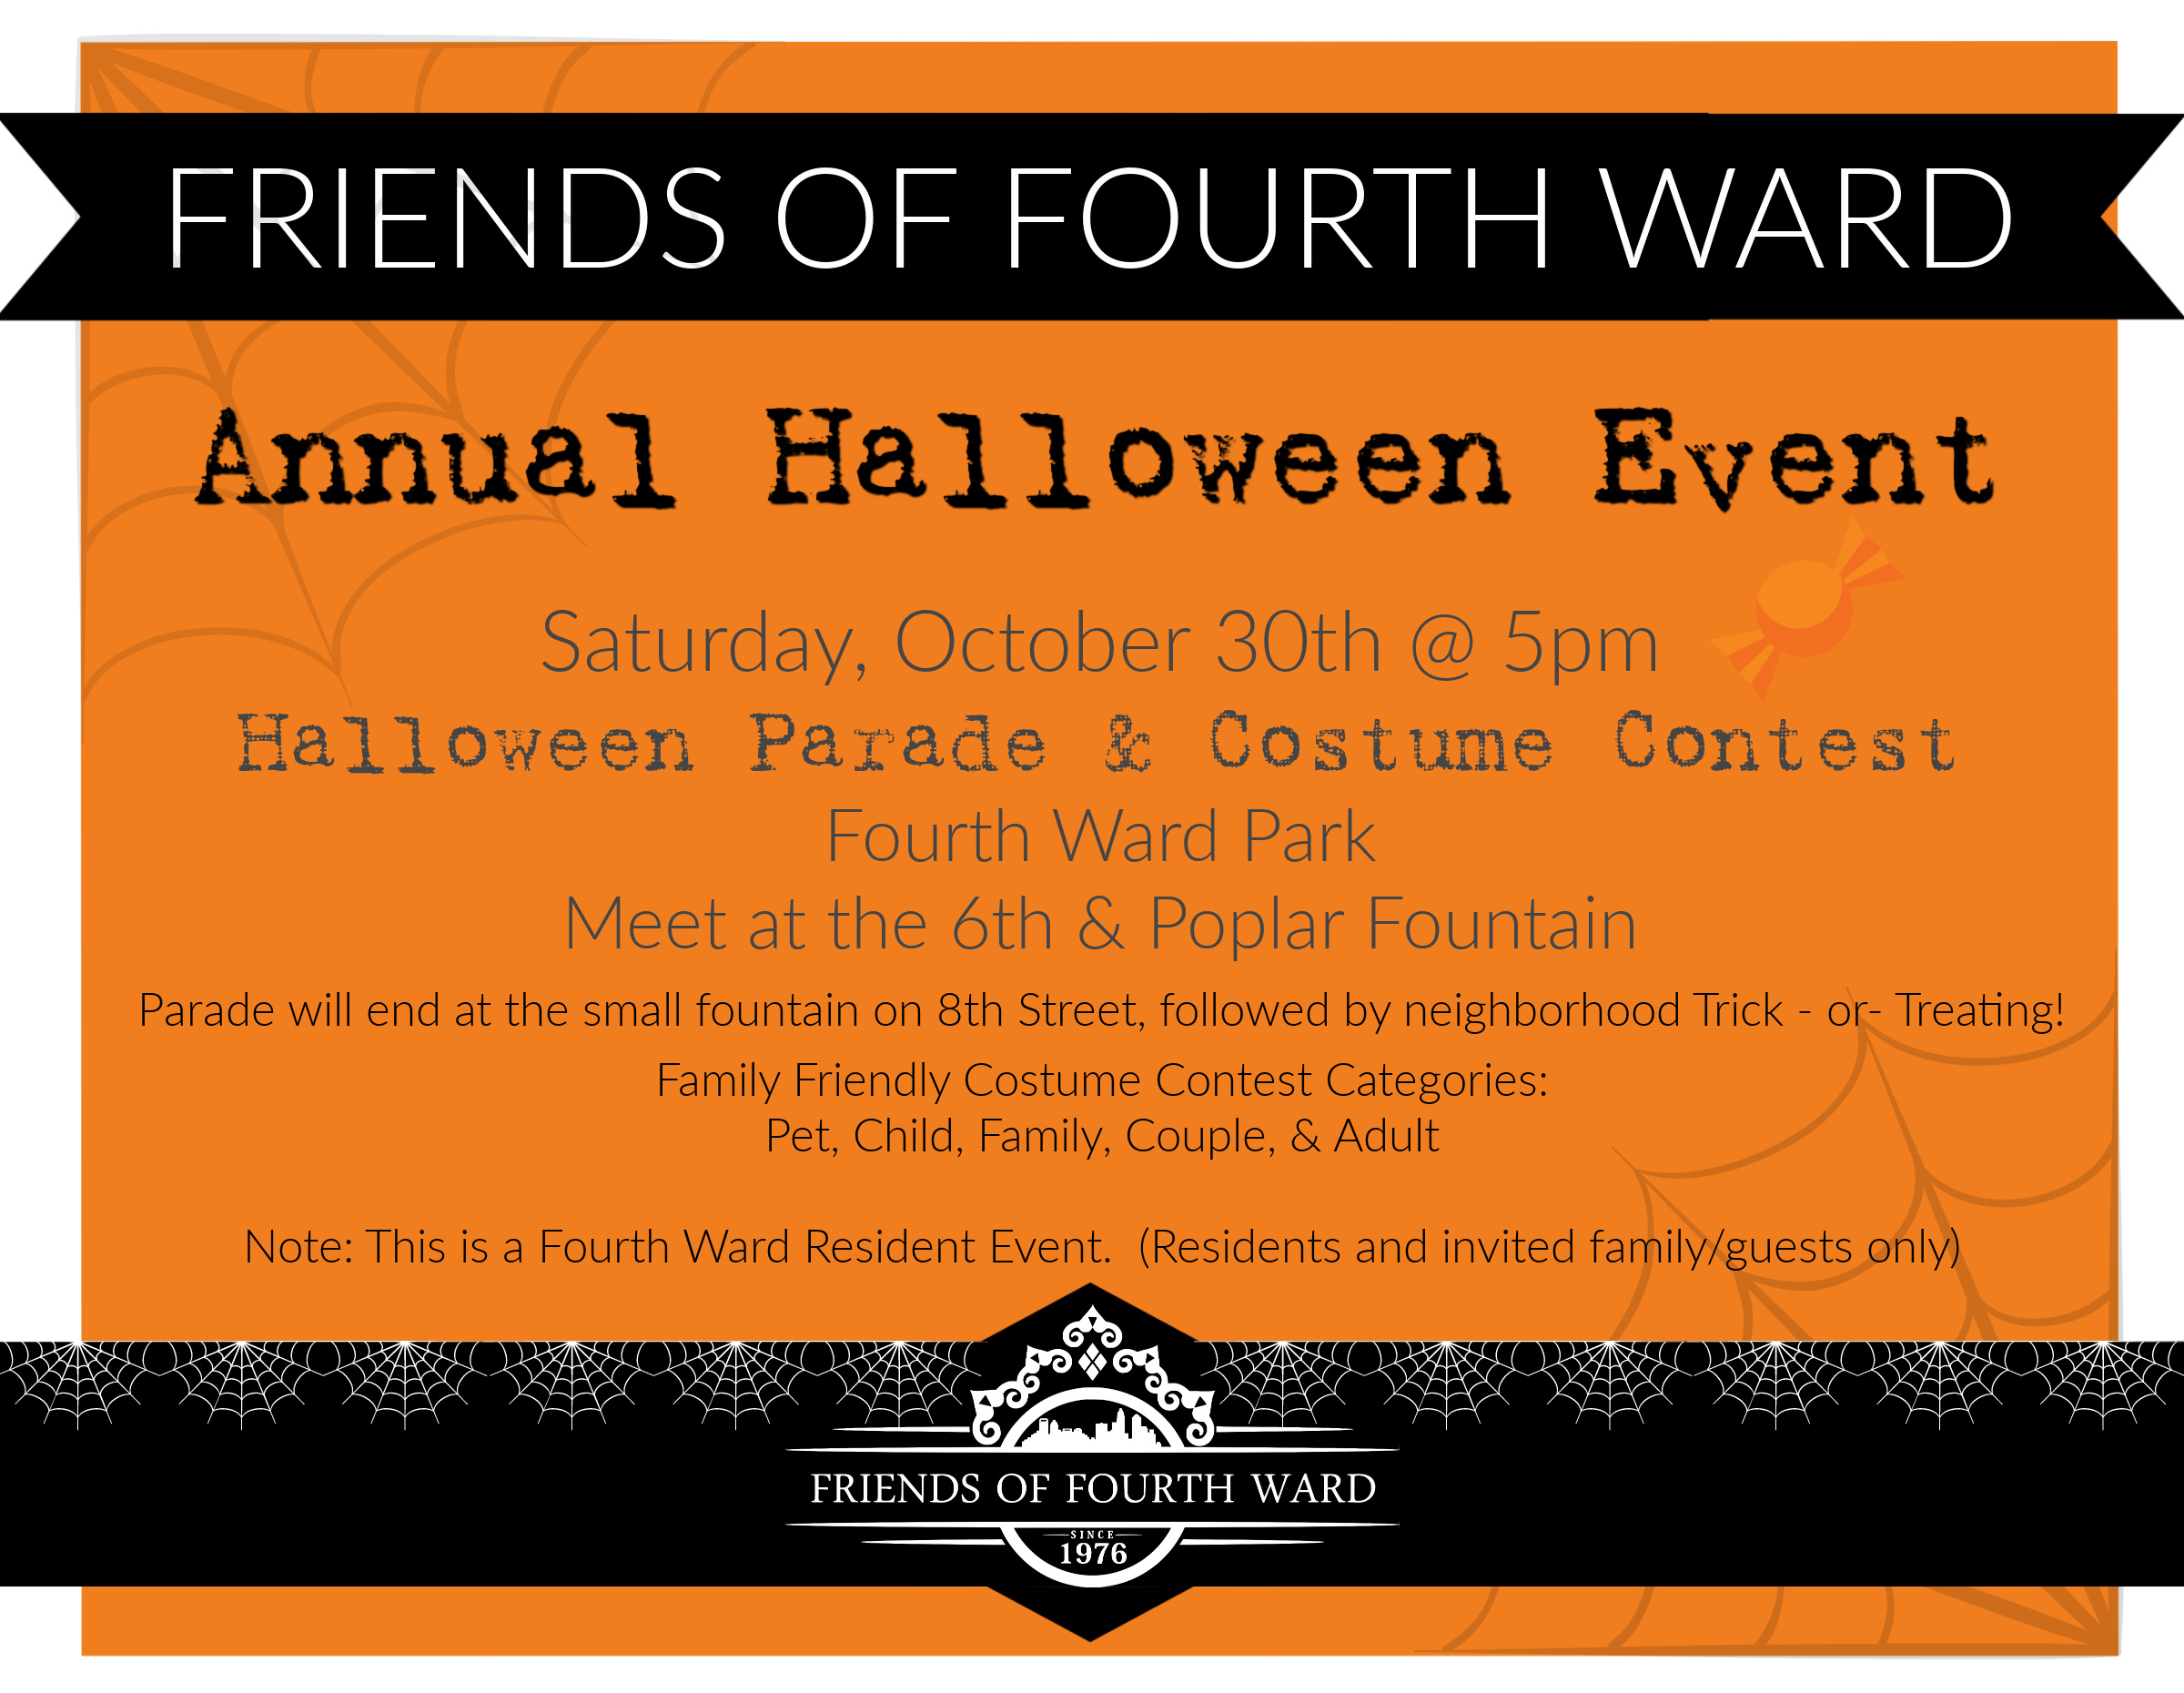 Halloween Parade and Costume Contest